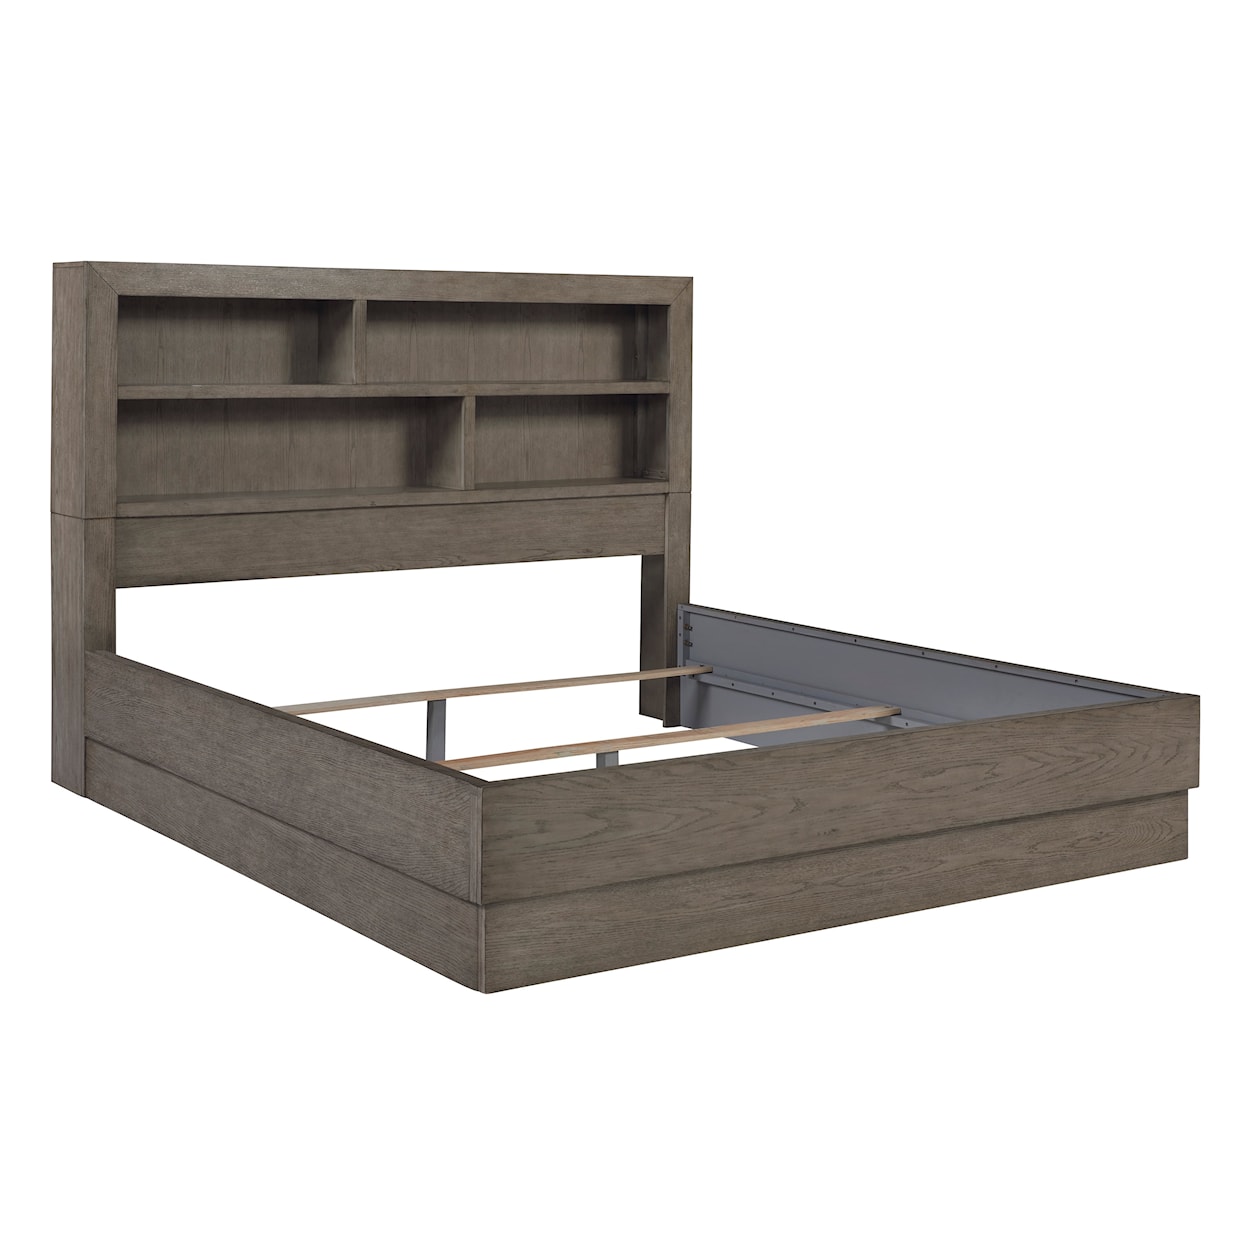 Benchcraft by Ashley Anibecca California King Bookcase Bed